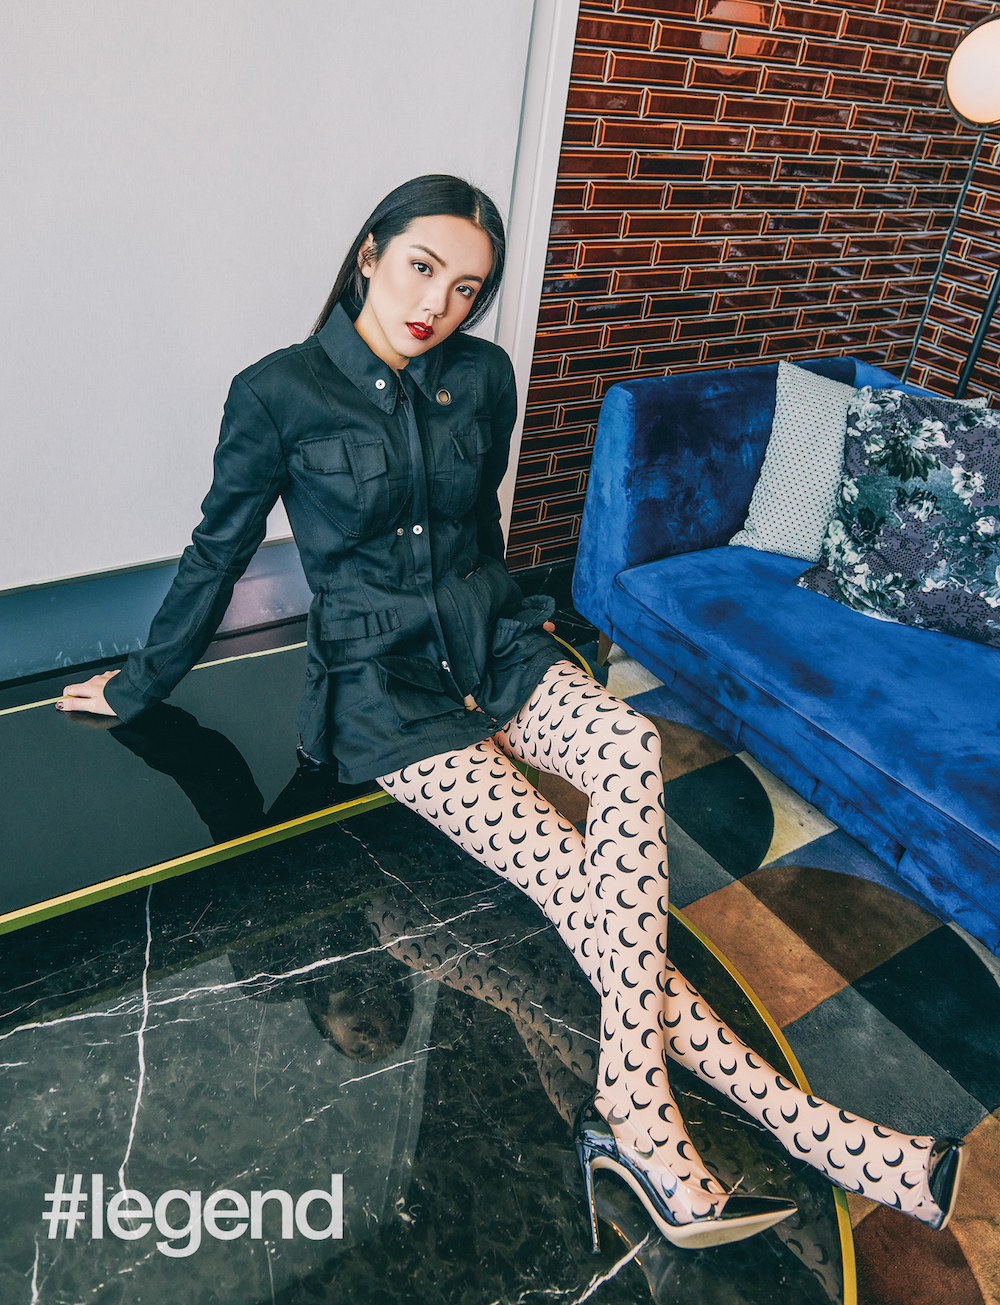 Printed leggings and black army jacket _ Marine Serre, by Joyce; Black shoes by Gianvito Rossi